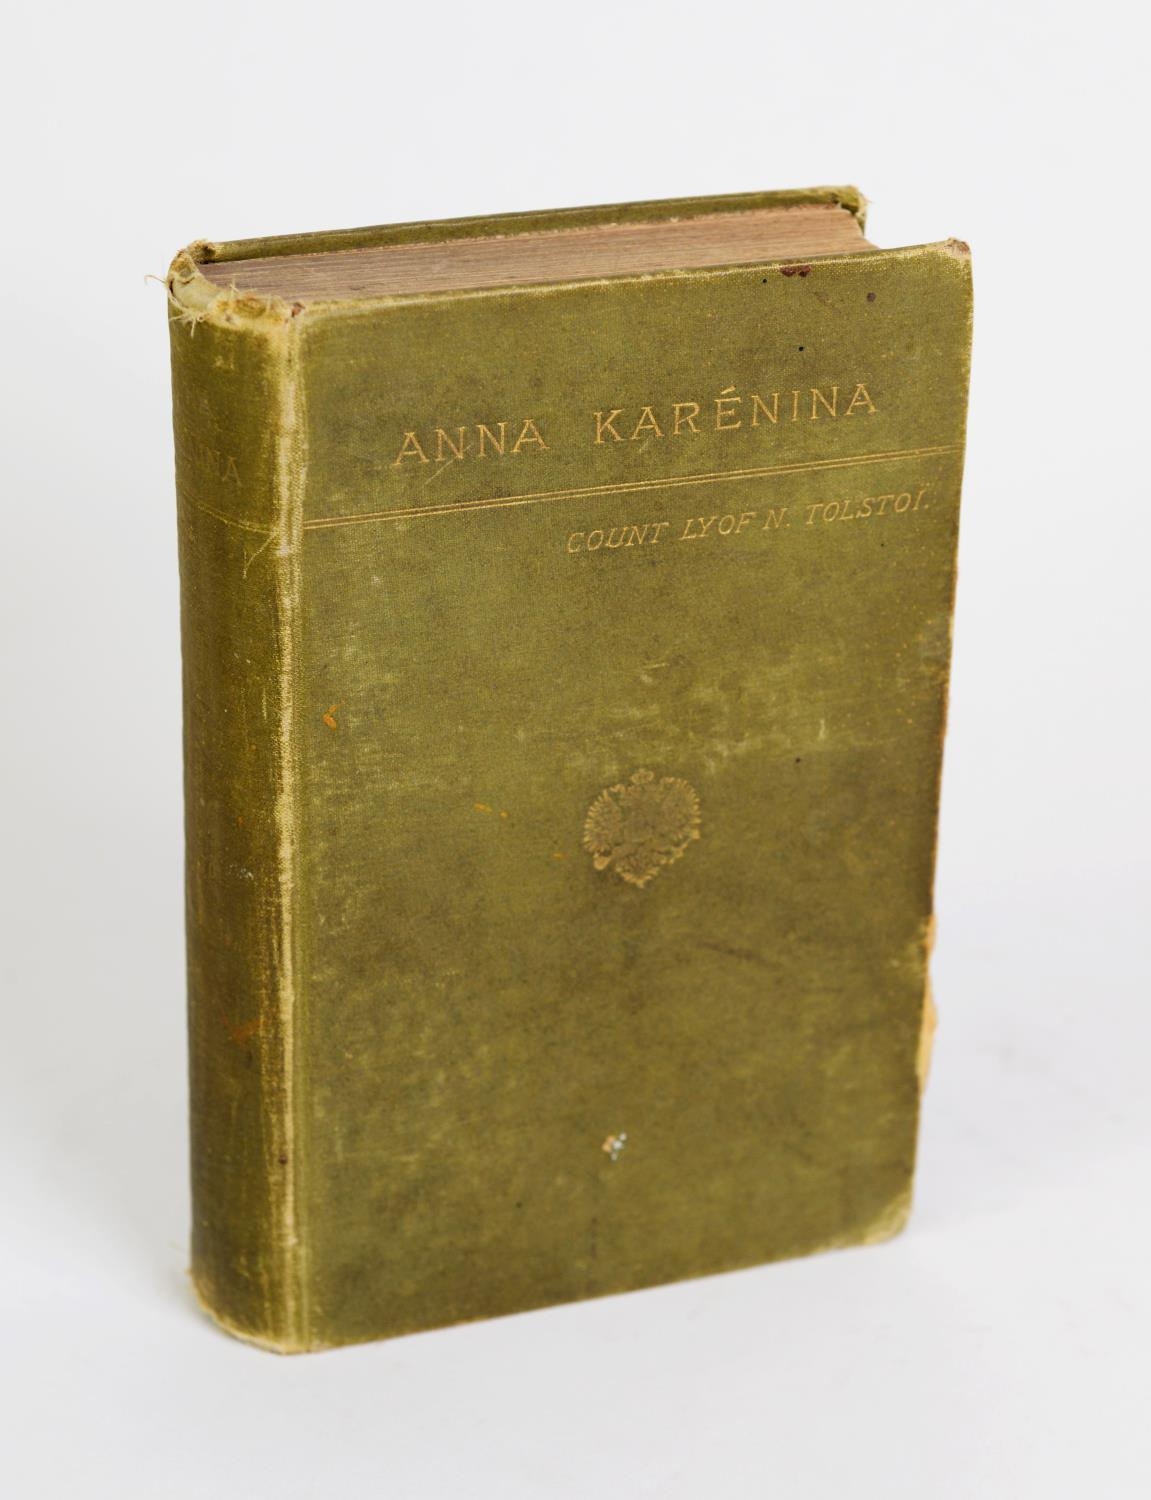 Count Lyof N Tolstoi (LEO TOLSTOY) - Anna Karenina, This particular copy missing the title page,